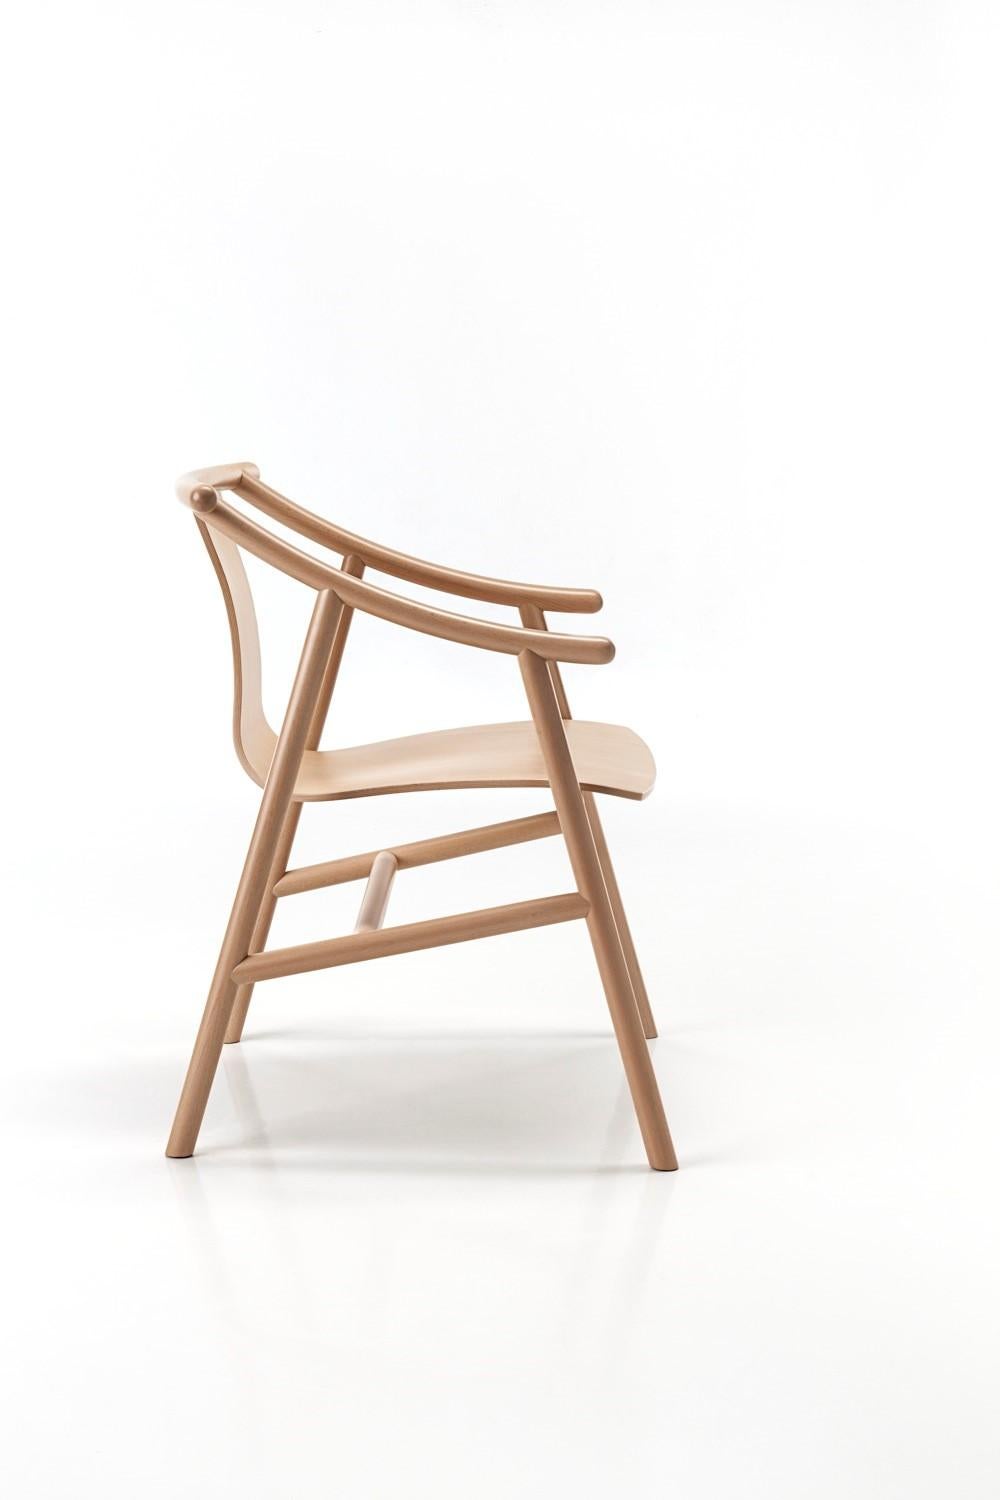 Designed by Vico Magistretti in 2003, the Magistretti 03 01 chair combines the warmth of wood and the timeless elegance of the design language of Gebrüder Thonet Vienna GmbH (GTV) with the refined style of the great master, one of the leading